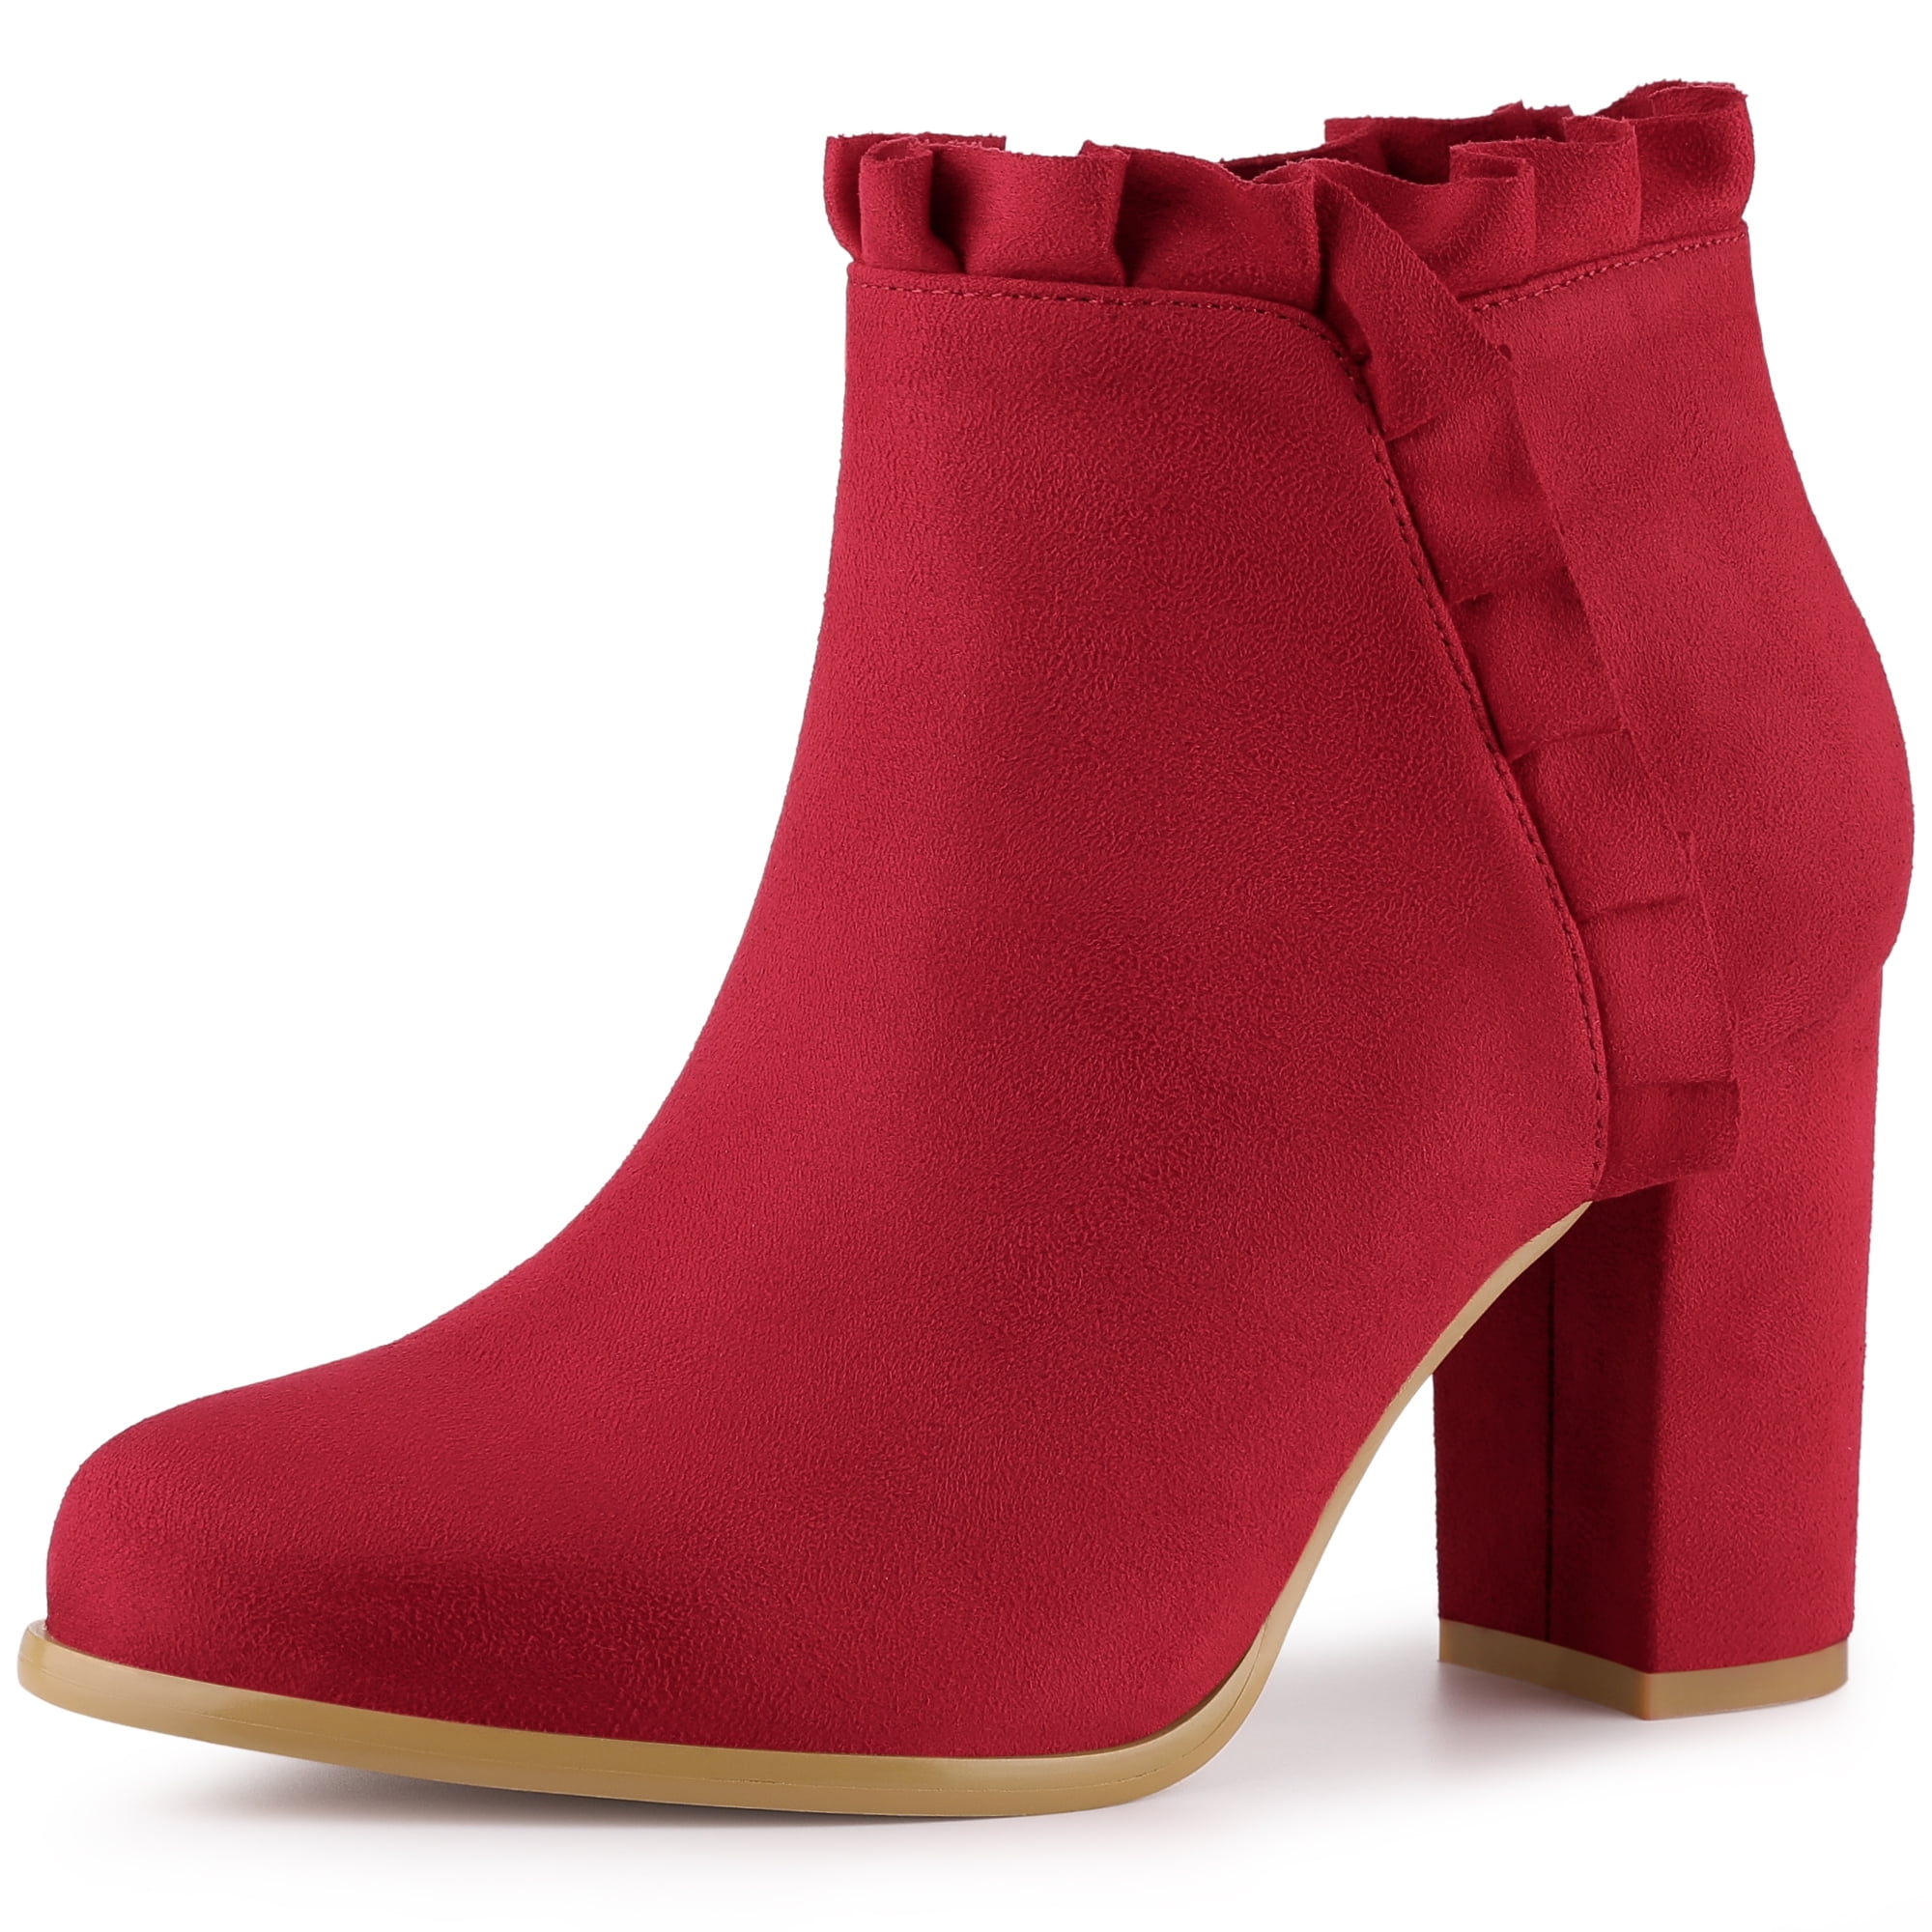 Enchanting - Red | Heeled Ankle Boot with Side-Lace | Fluevog Shoes